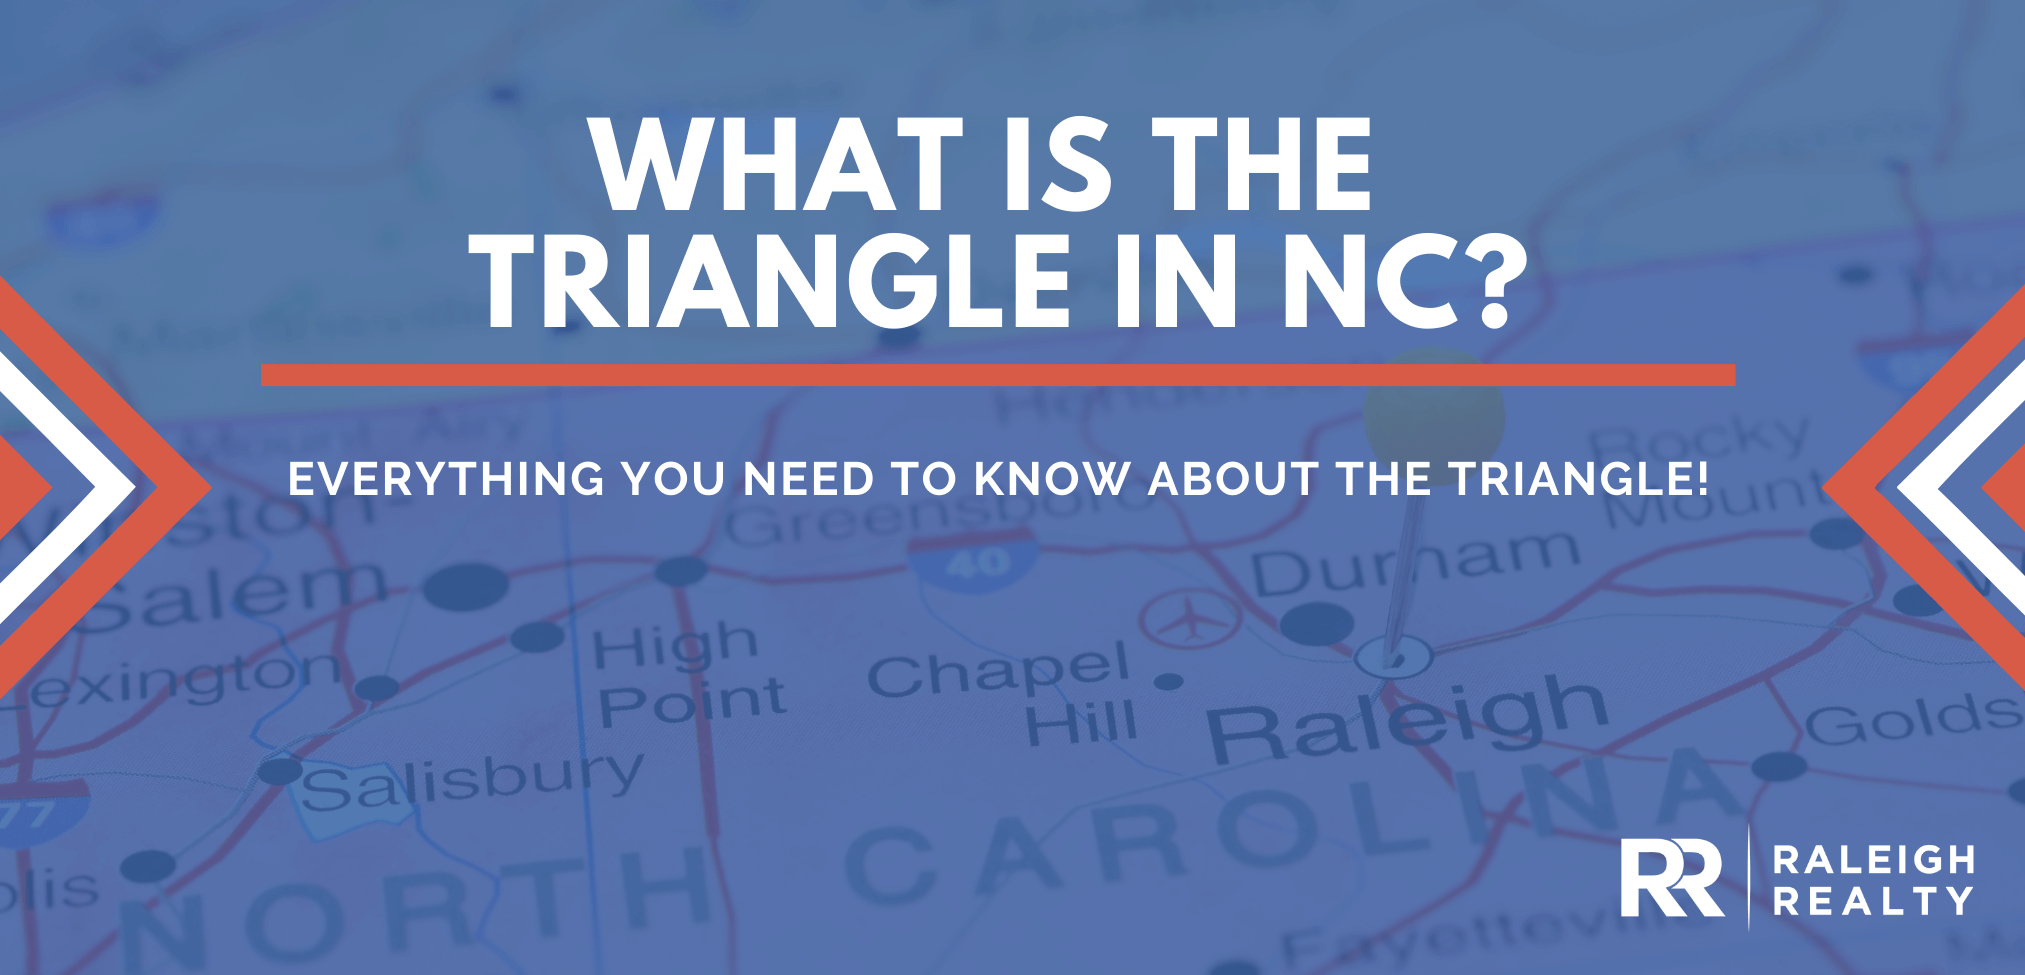 What is the Triangle in NC?